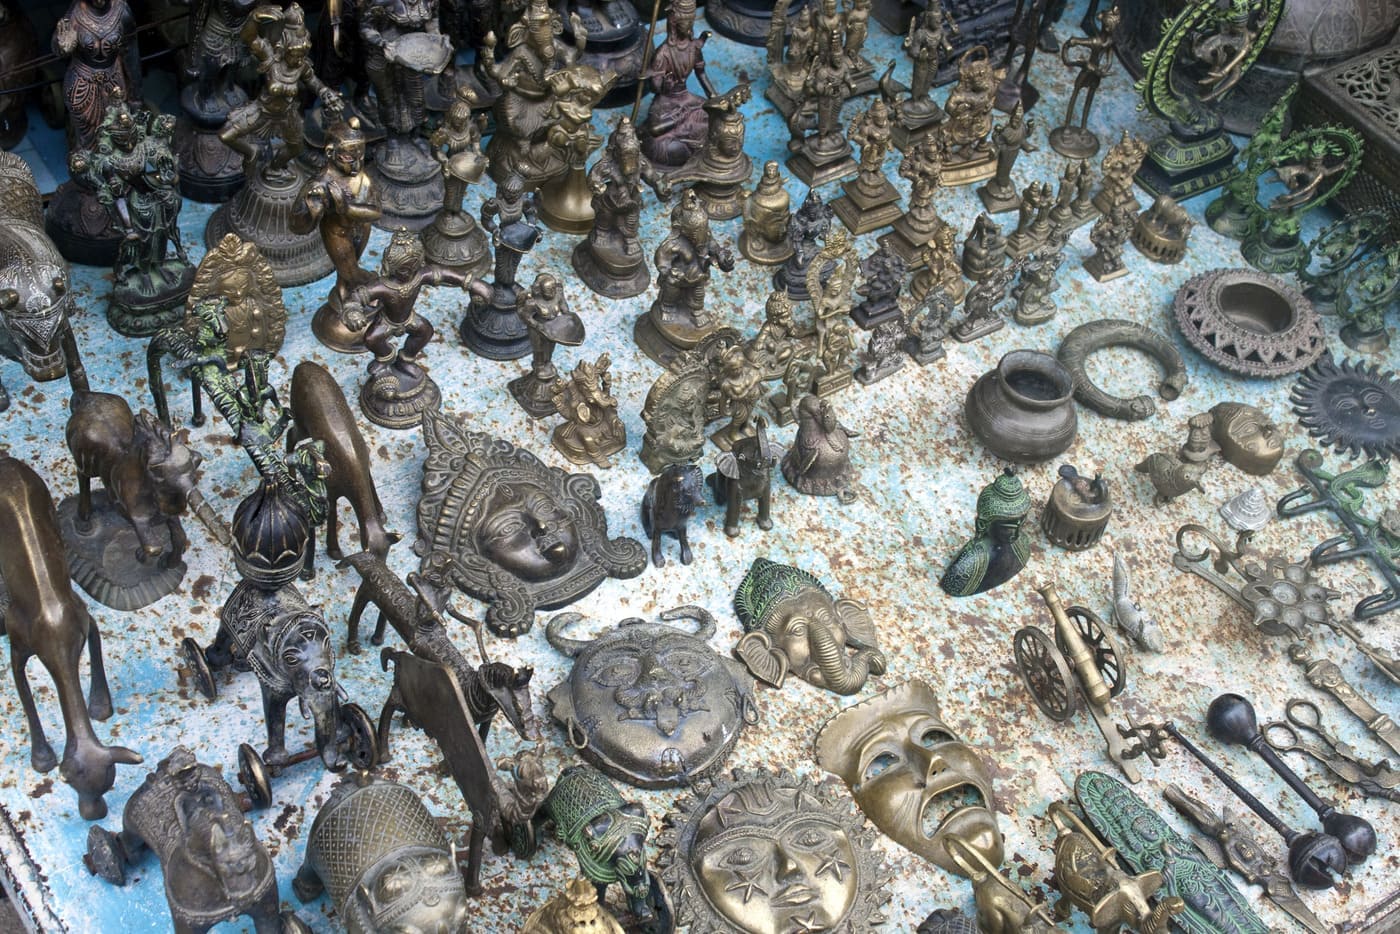 Bronze sculptures and figurines for sale in a village market in Orchha